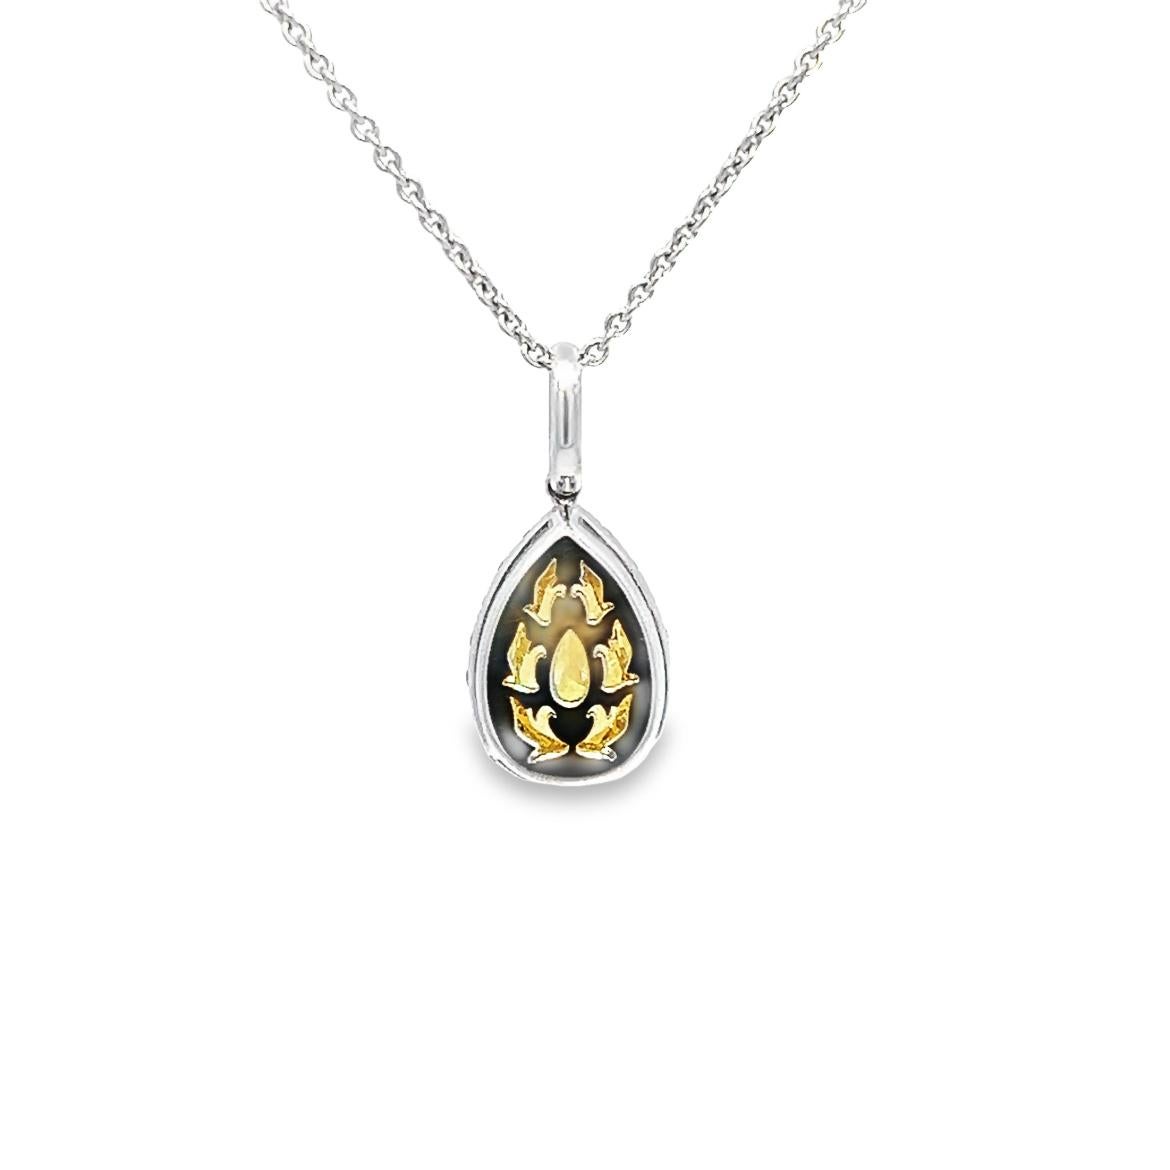 Pear Cut 1.09CT Total weight Fancy Vivid Orangy Yellow Pendant Necklace, set in 18kyw GIA For Sale